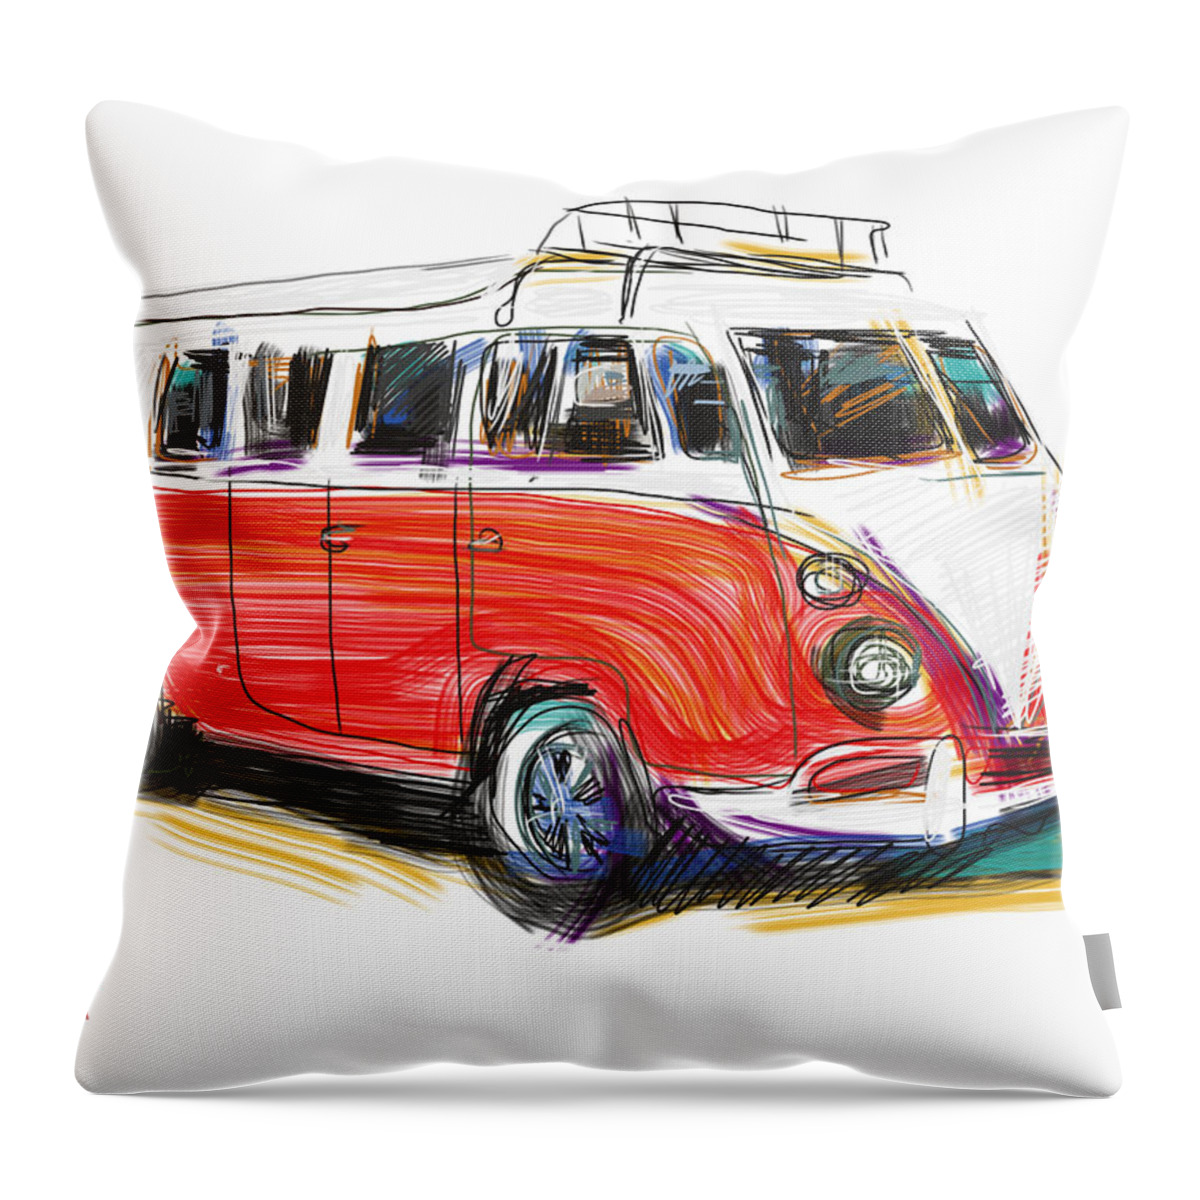 V Dub Throw Pillow featuring the mixed media V Dub by Russell Pierce